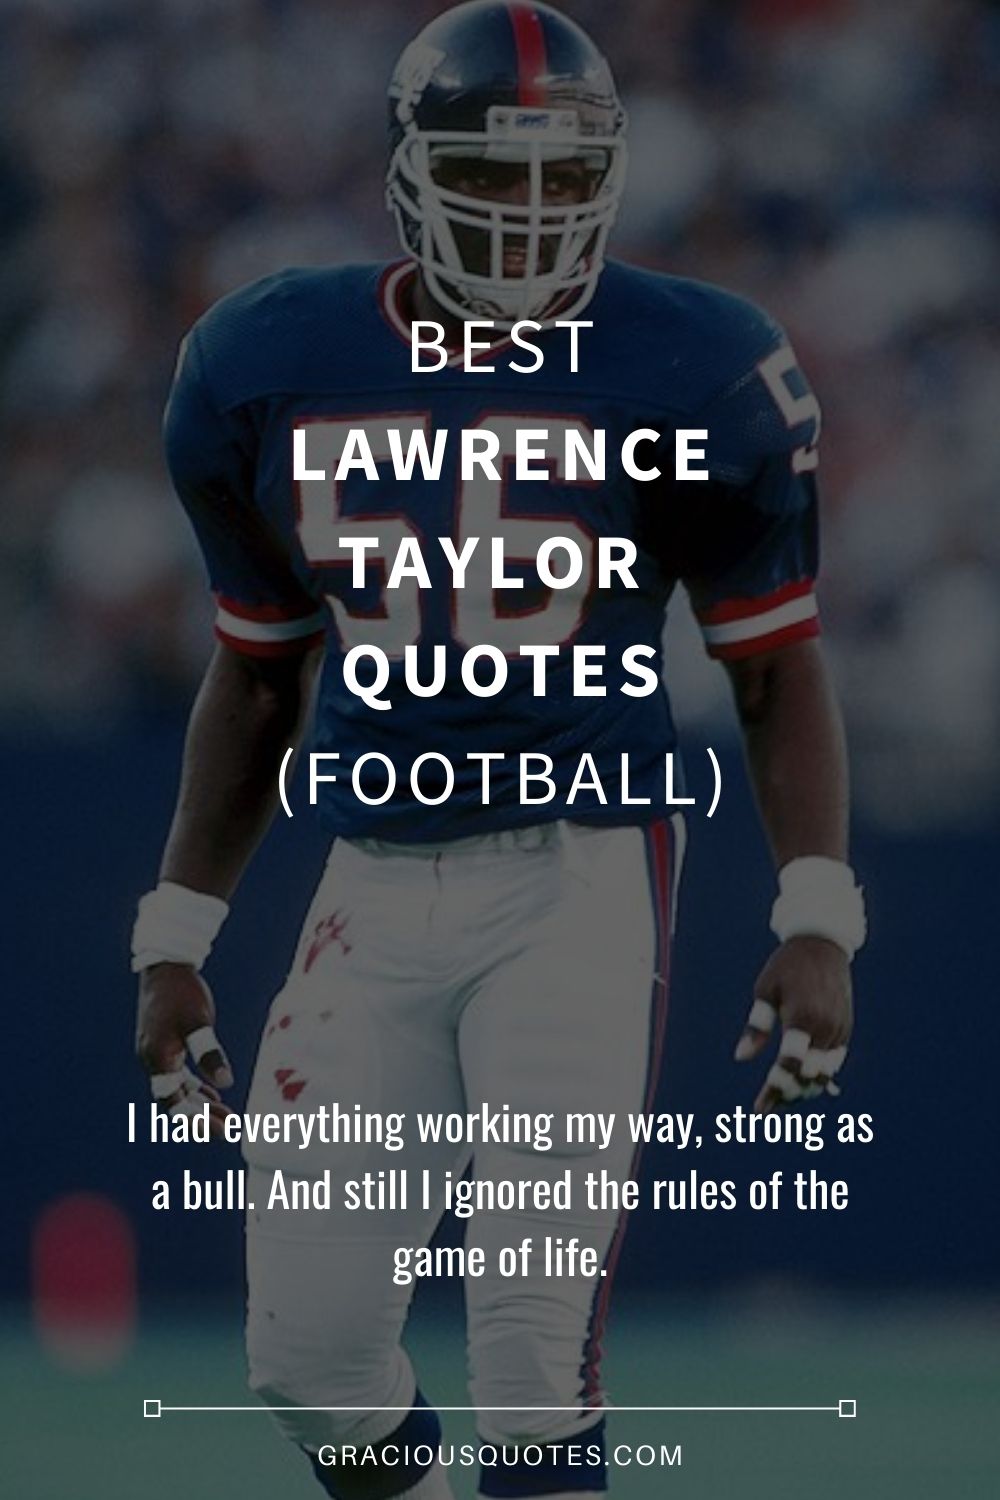 Best Lawrence Taylor Quotes (FOOTBALL) - Gracious Quotes